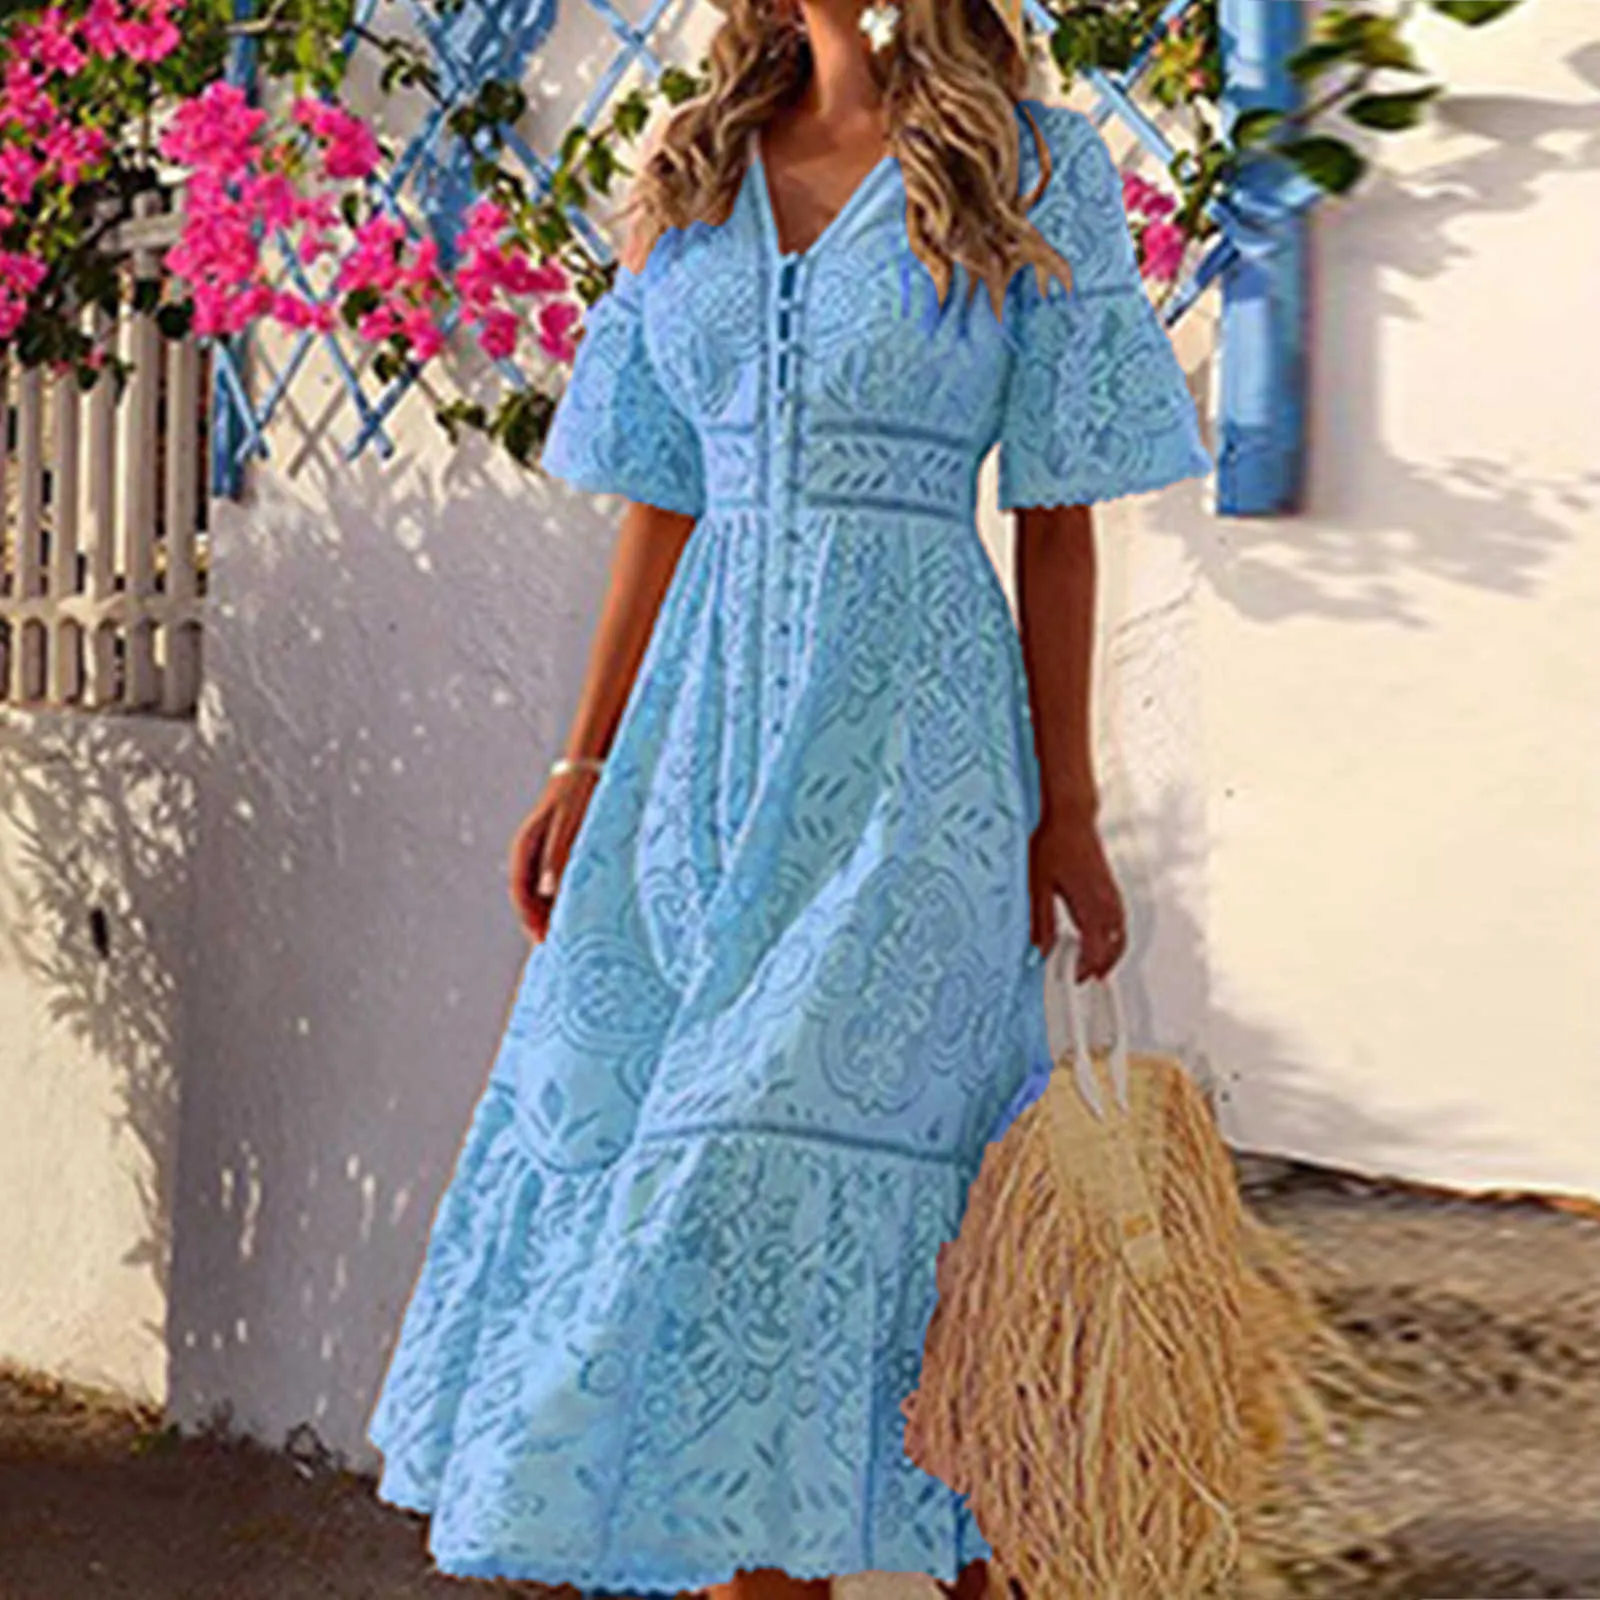 Sexy Bohemian Maxi Dresses For Women Lace Long Sleeve V Neck Boho Swing Dresses Long Cocktail Prom Gown Party Dress Robe Femme Q0707